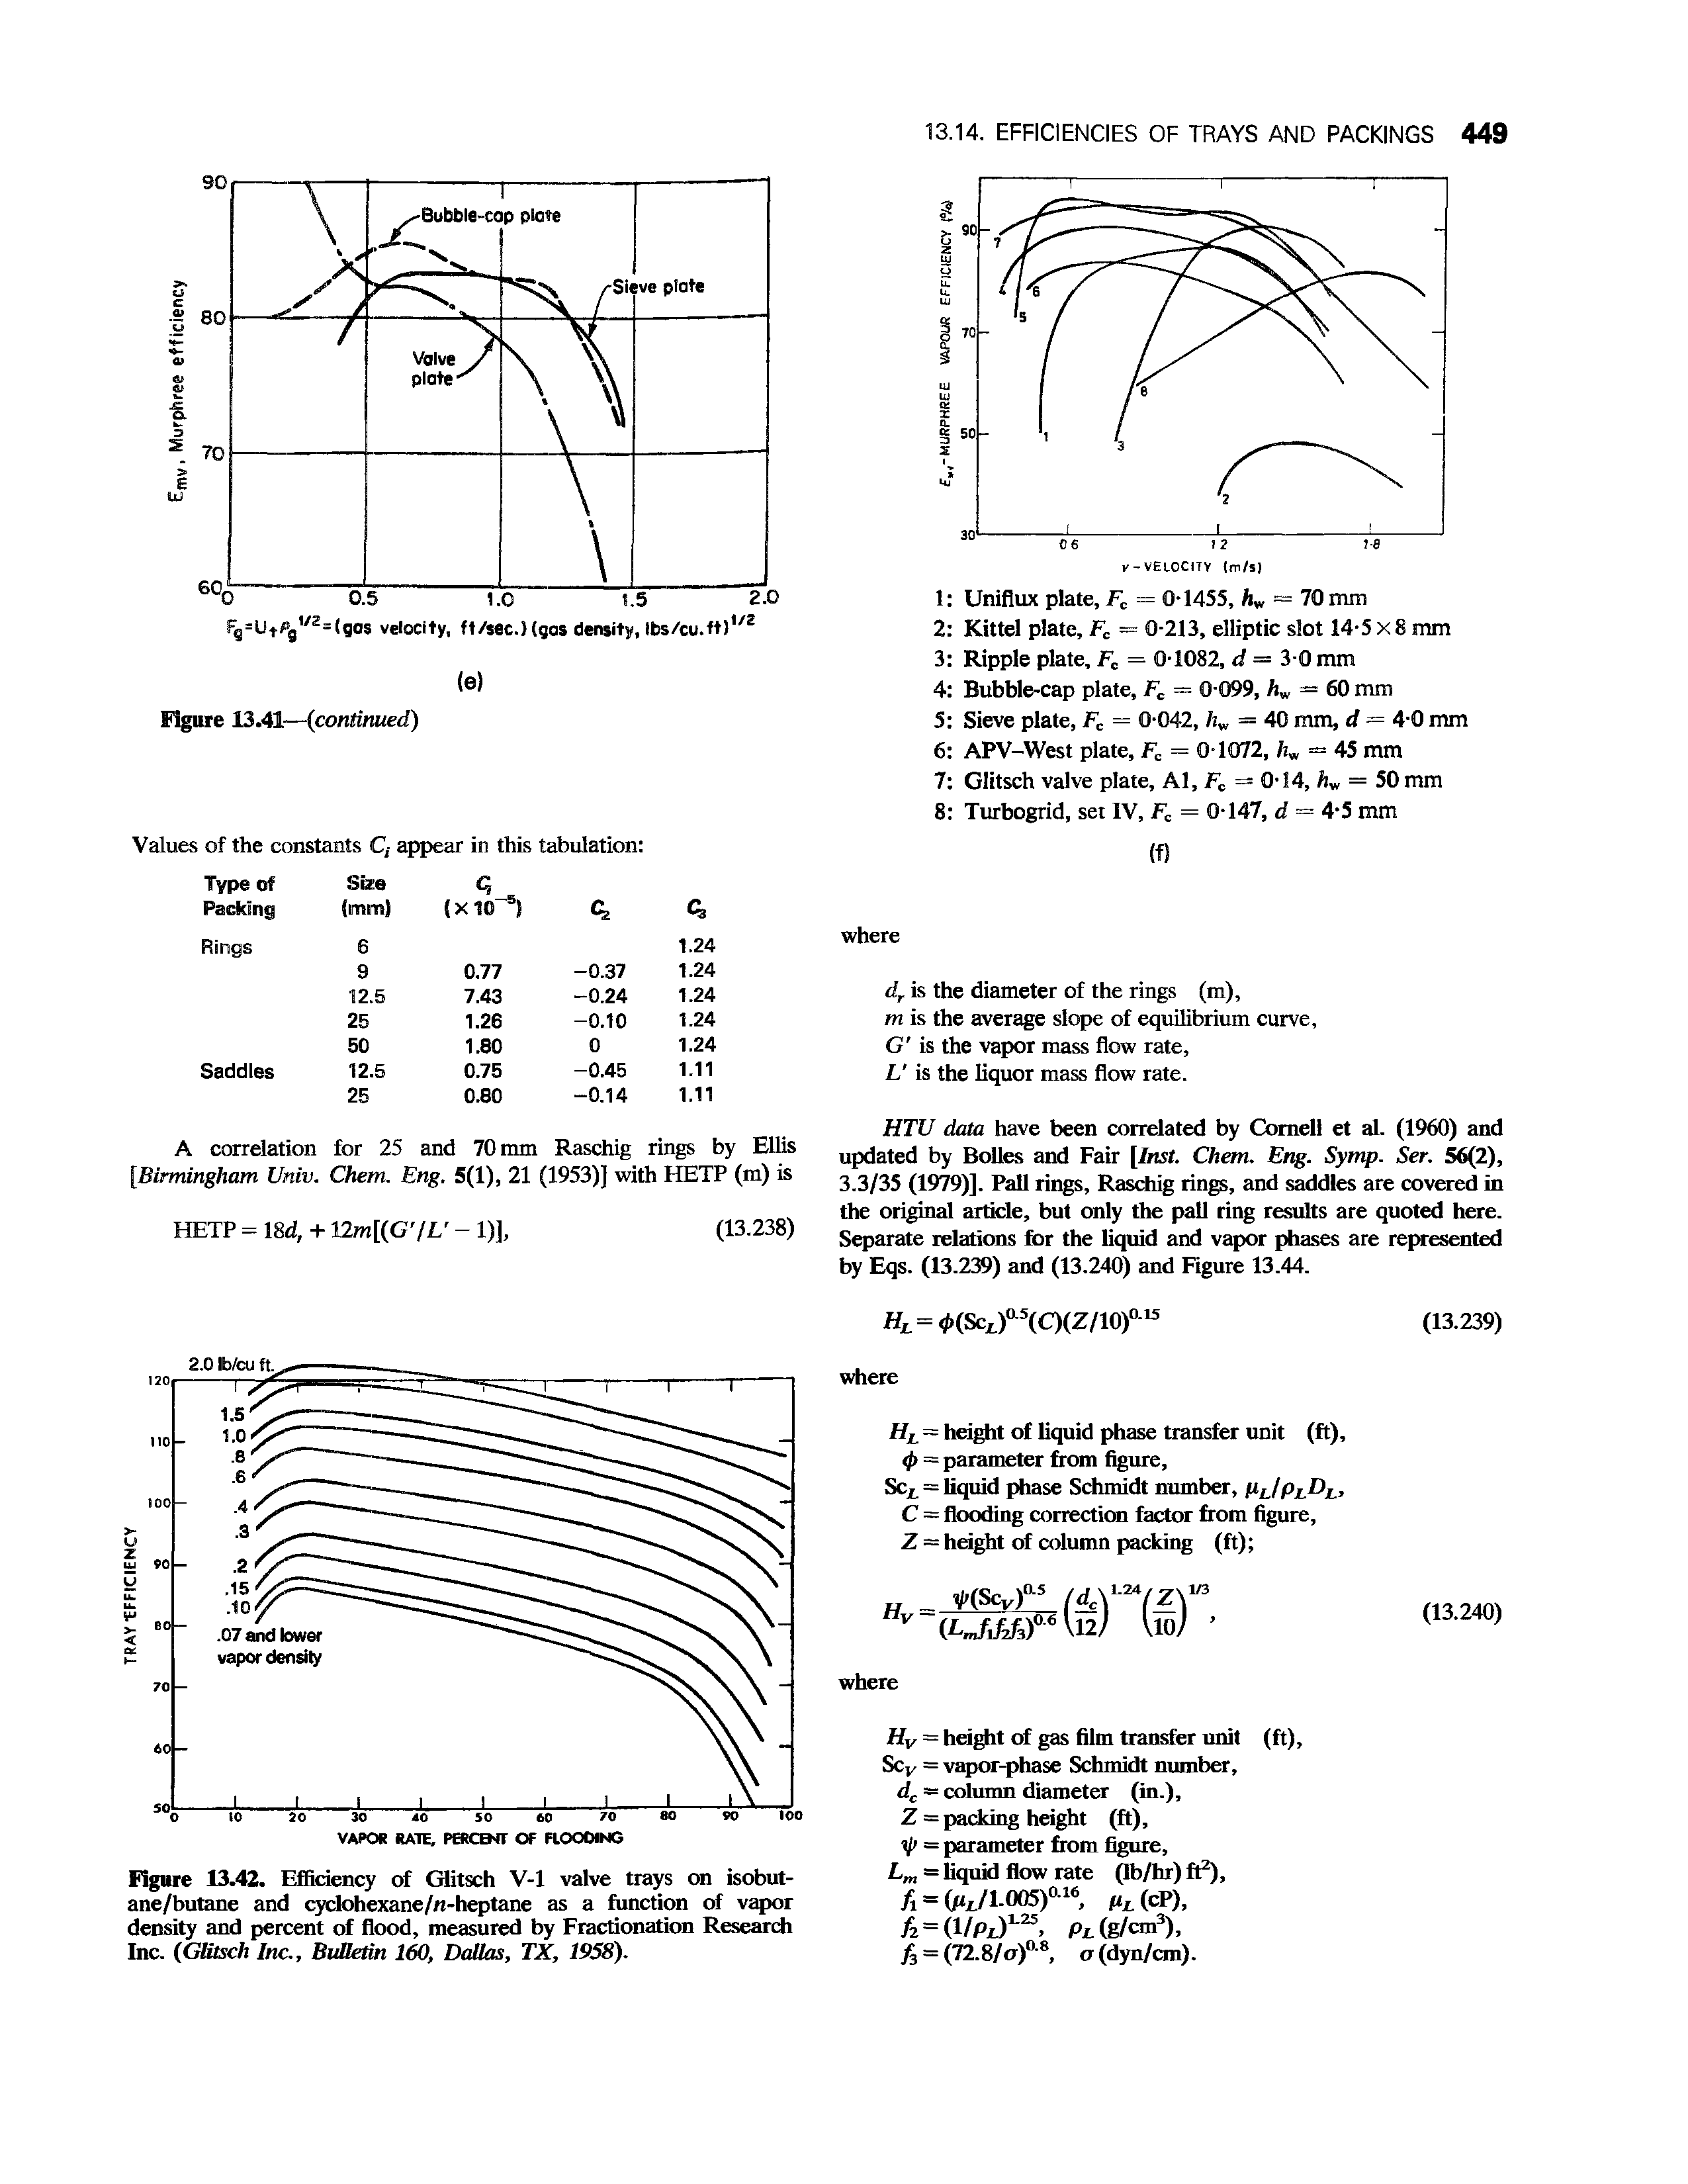 Figure 13.42. Efficiency of Glitsch V-l valve trays on isobut-ane/butane and cyclohexane/n-heptane as a function of vapor density and percent of flood, measured by Fractionation Research Inc. (Glitsch Inc., Bulletin 160, Dallas, TX, 1958).